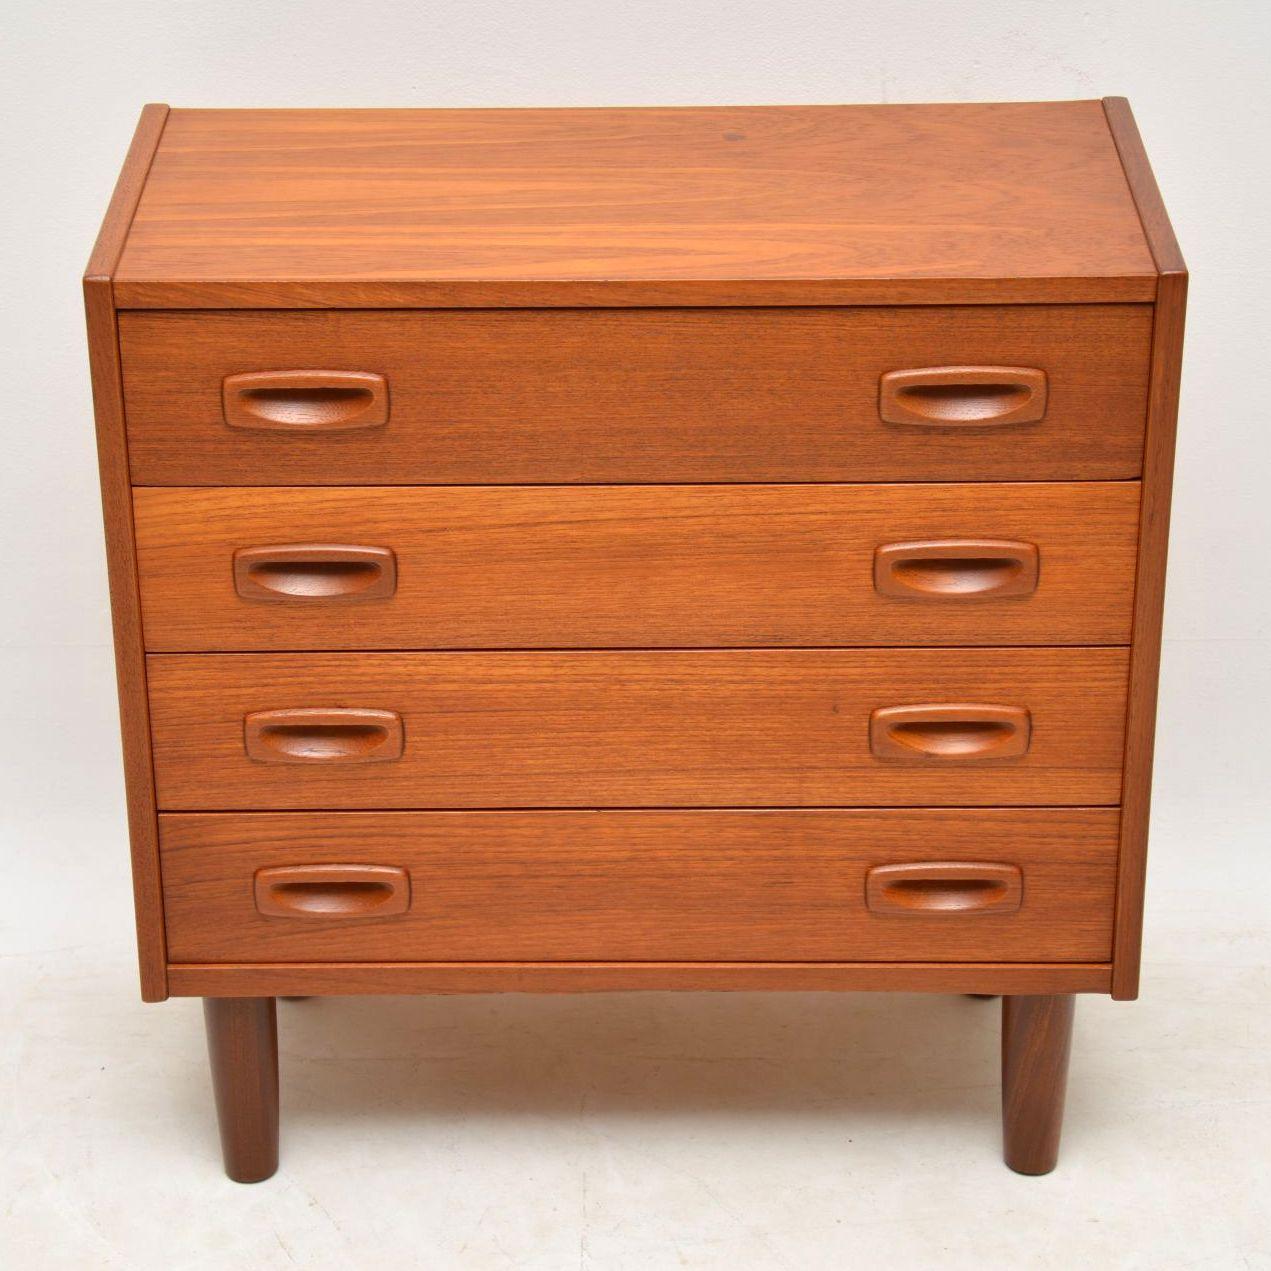 A stylish little Danish teak chest of drawers, this was made in the 1960s. It’s a petite and useful size, with plenty of storage space. We have had this stripped and re-polished to a very high standard, the condition is excellent. The top drawer has